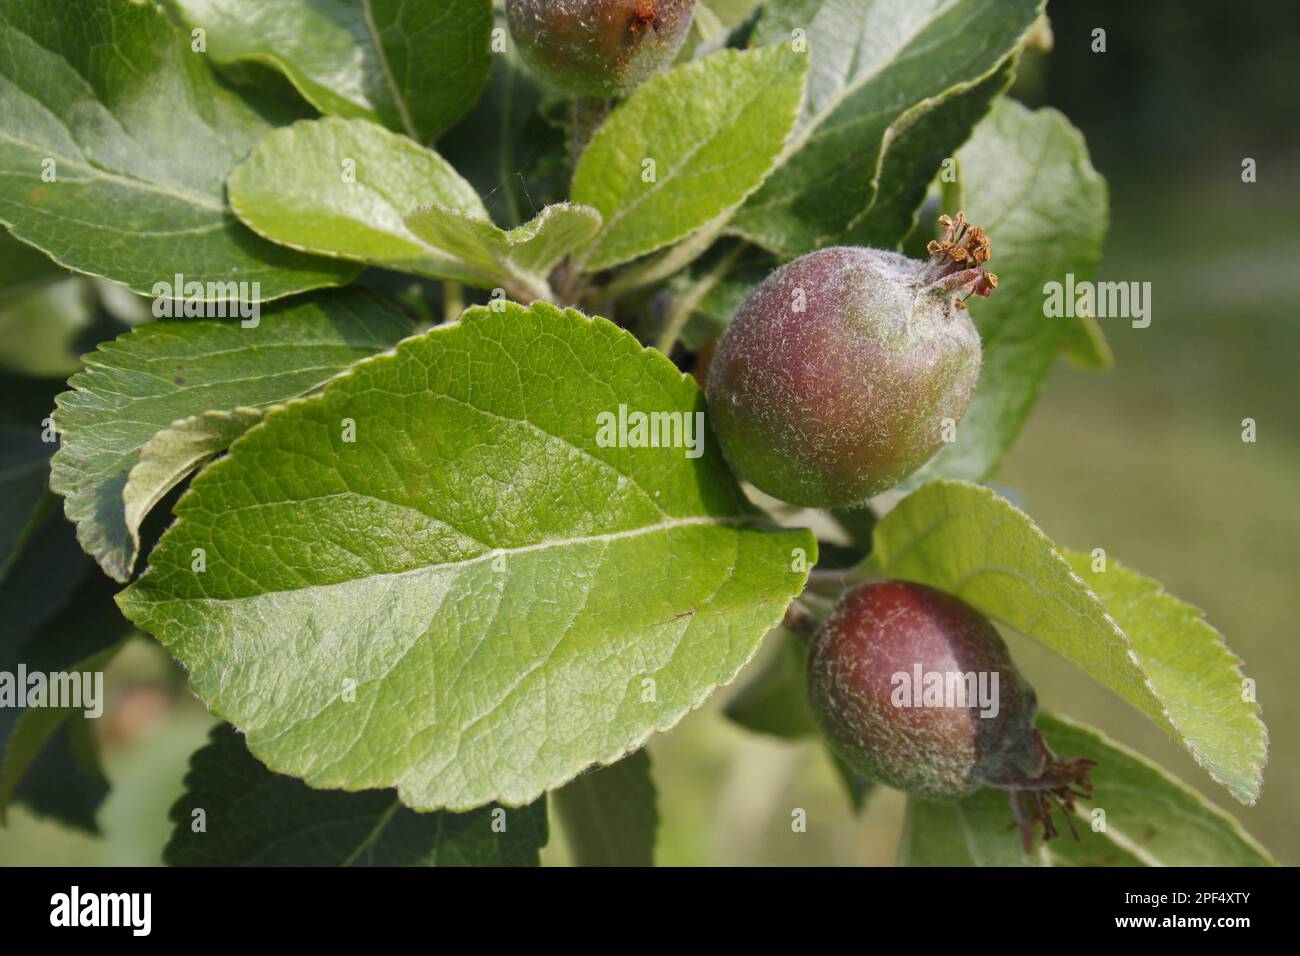 Cultivated Apple (Malus domestica) close-up of leaves and developing fruit, in garden, Suffolk, England, United Kingdom Stock Photo